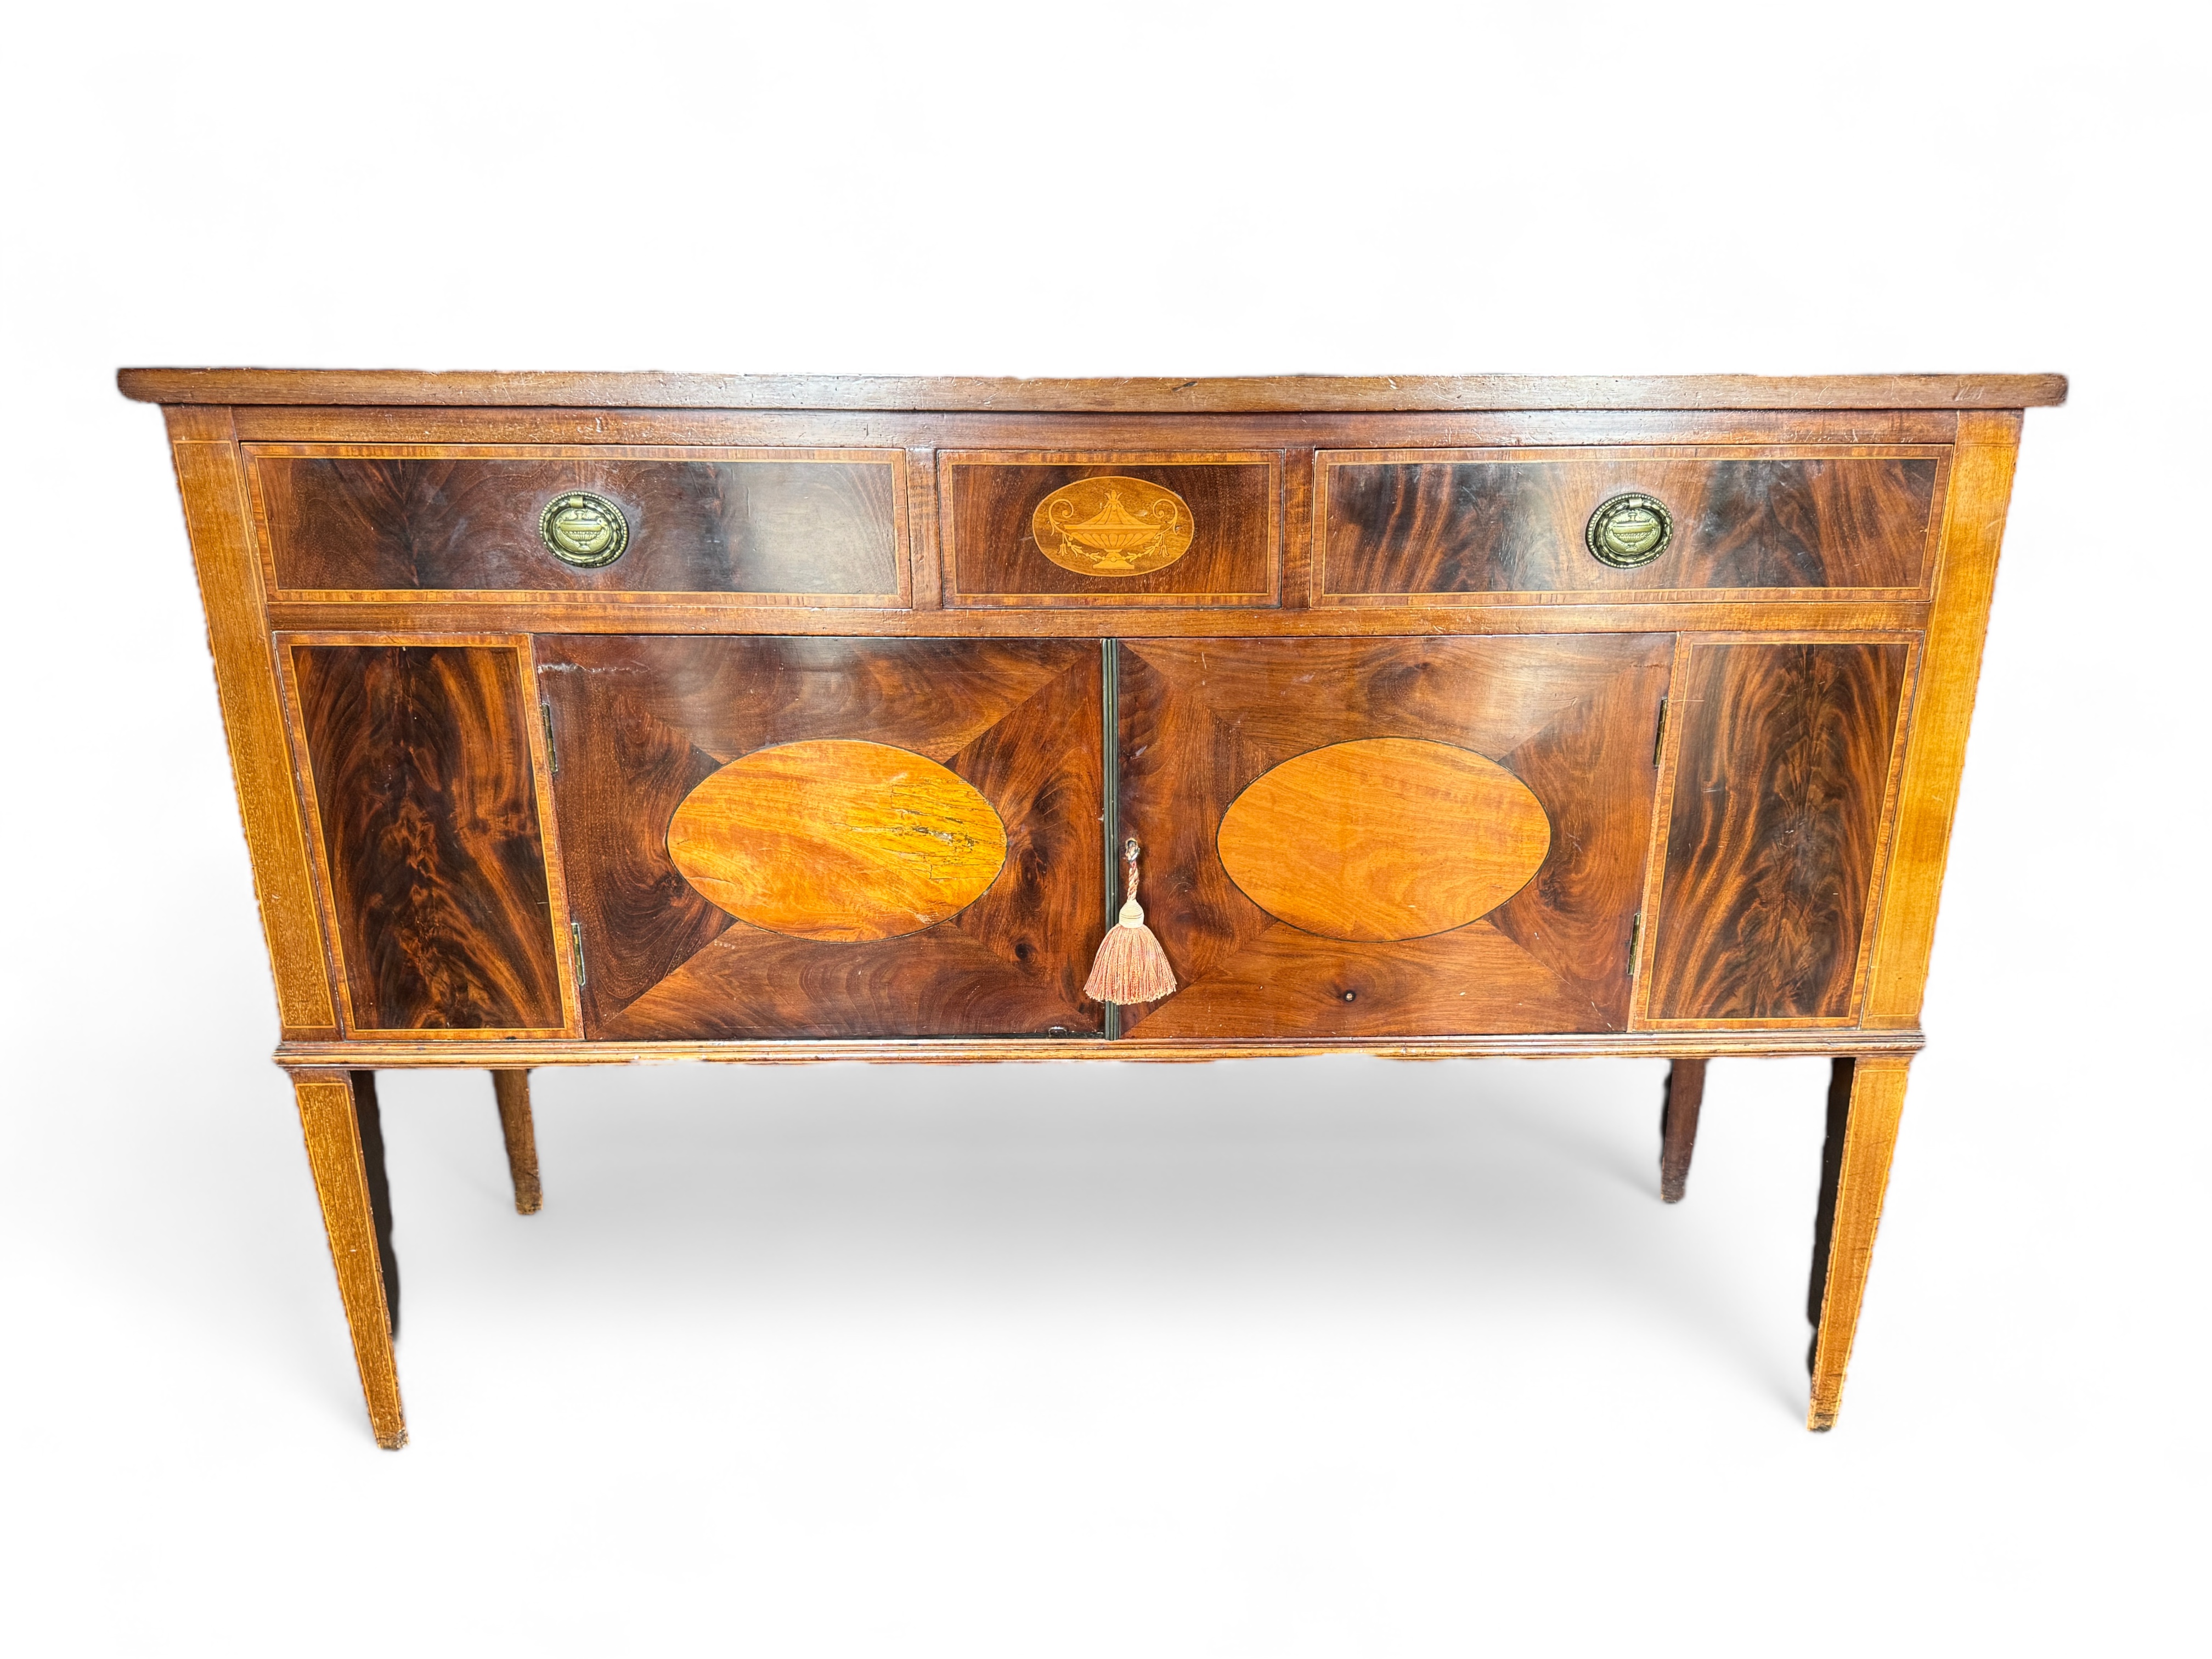 A 19th century mahogany and satinwood crossbanded marquetry sideboard in the George III style